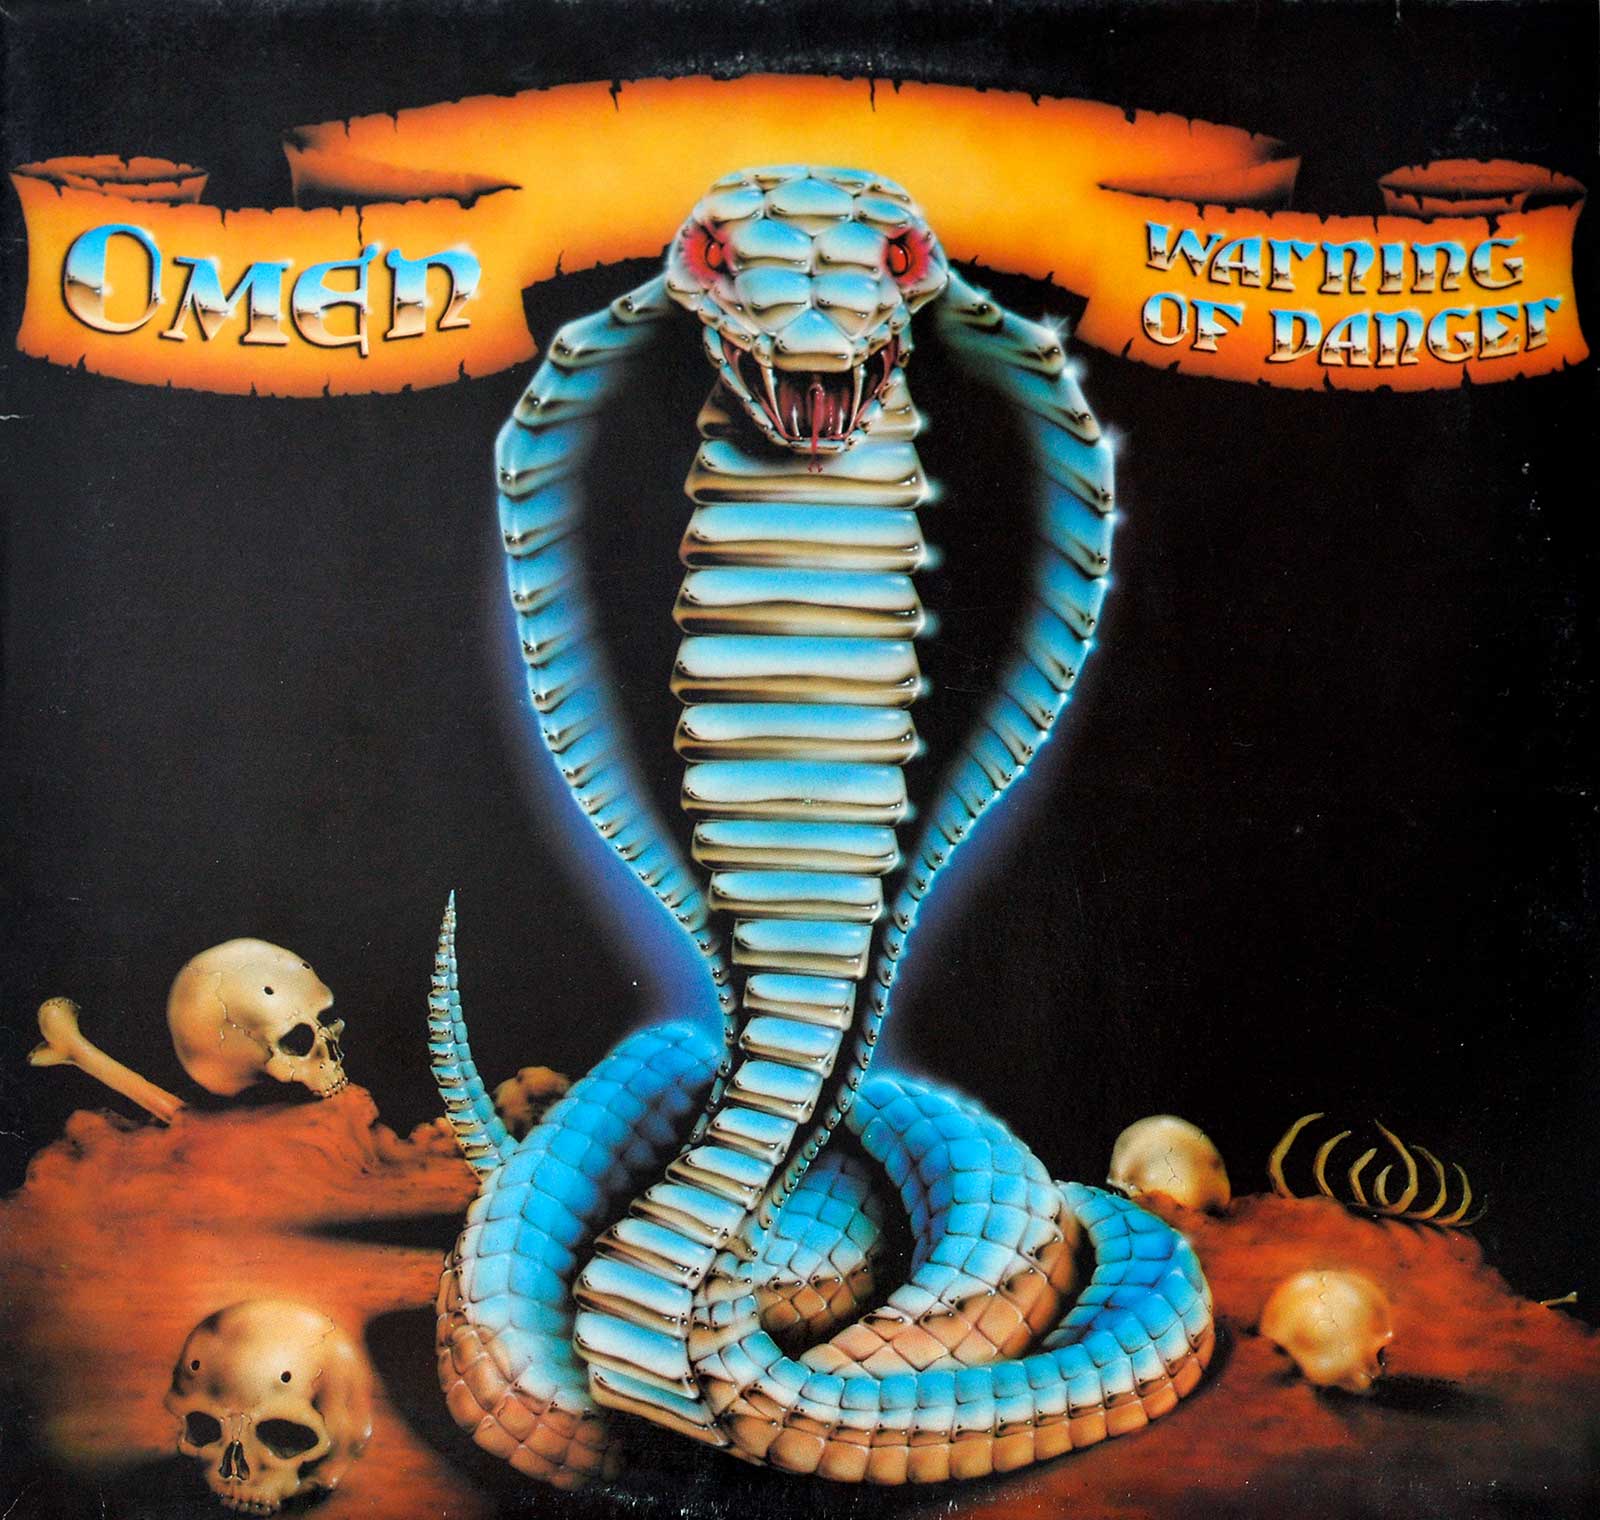 large album front cover photo of: Warning of Danger by Omen